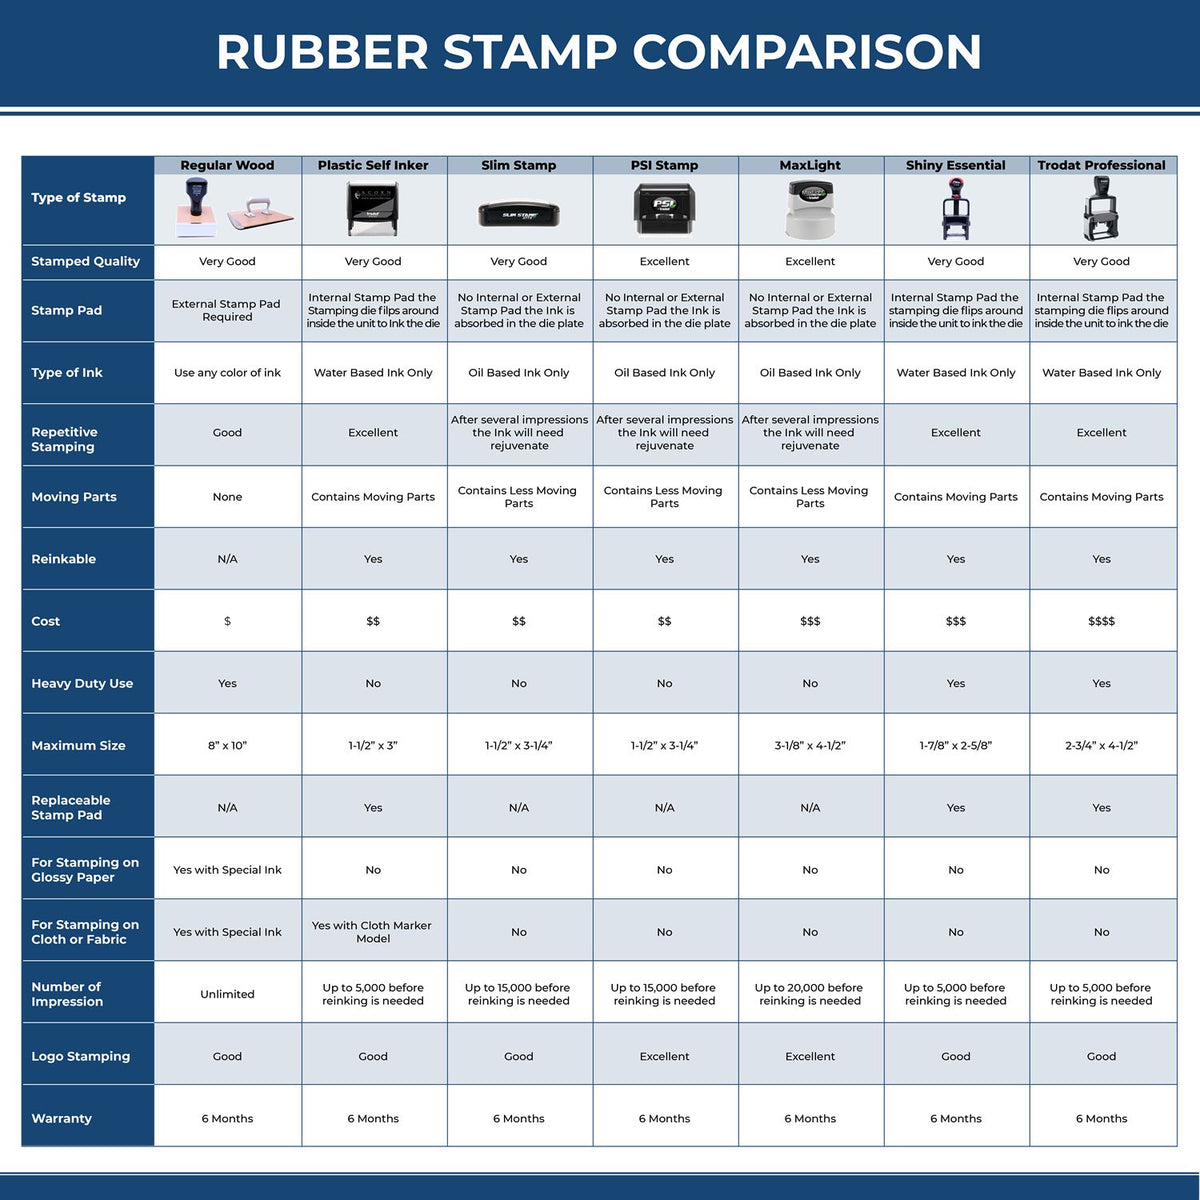 A comparison chart for the different types of mount models available for the MaxLight Premium Pre-Inked Indiana Rectangular Notarial Stamp.